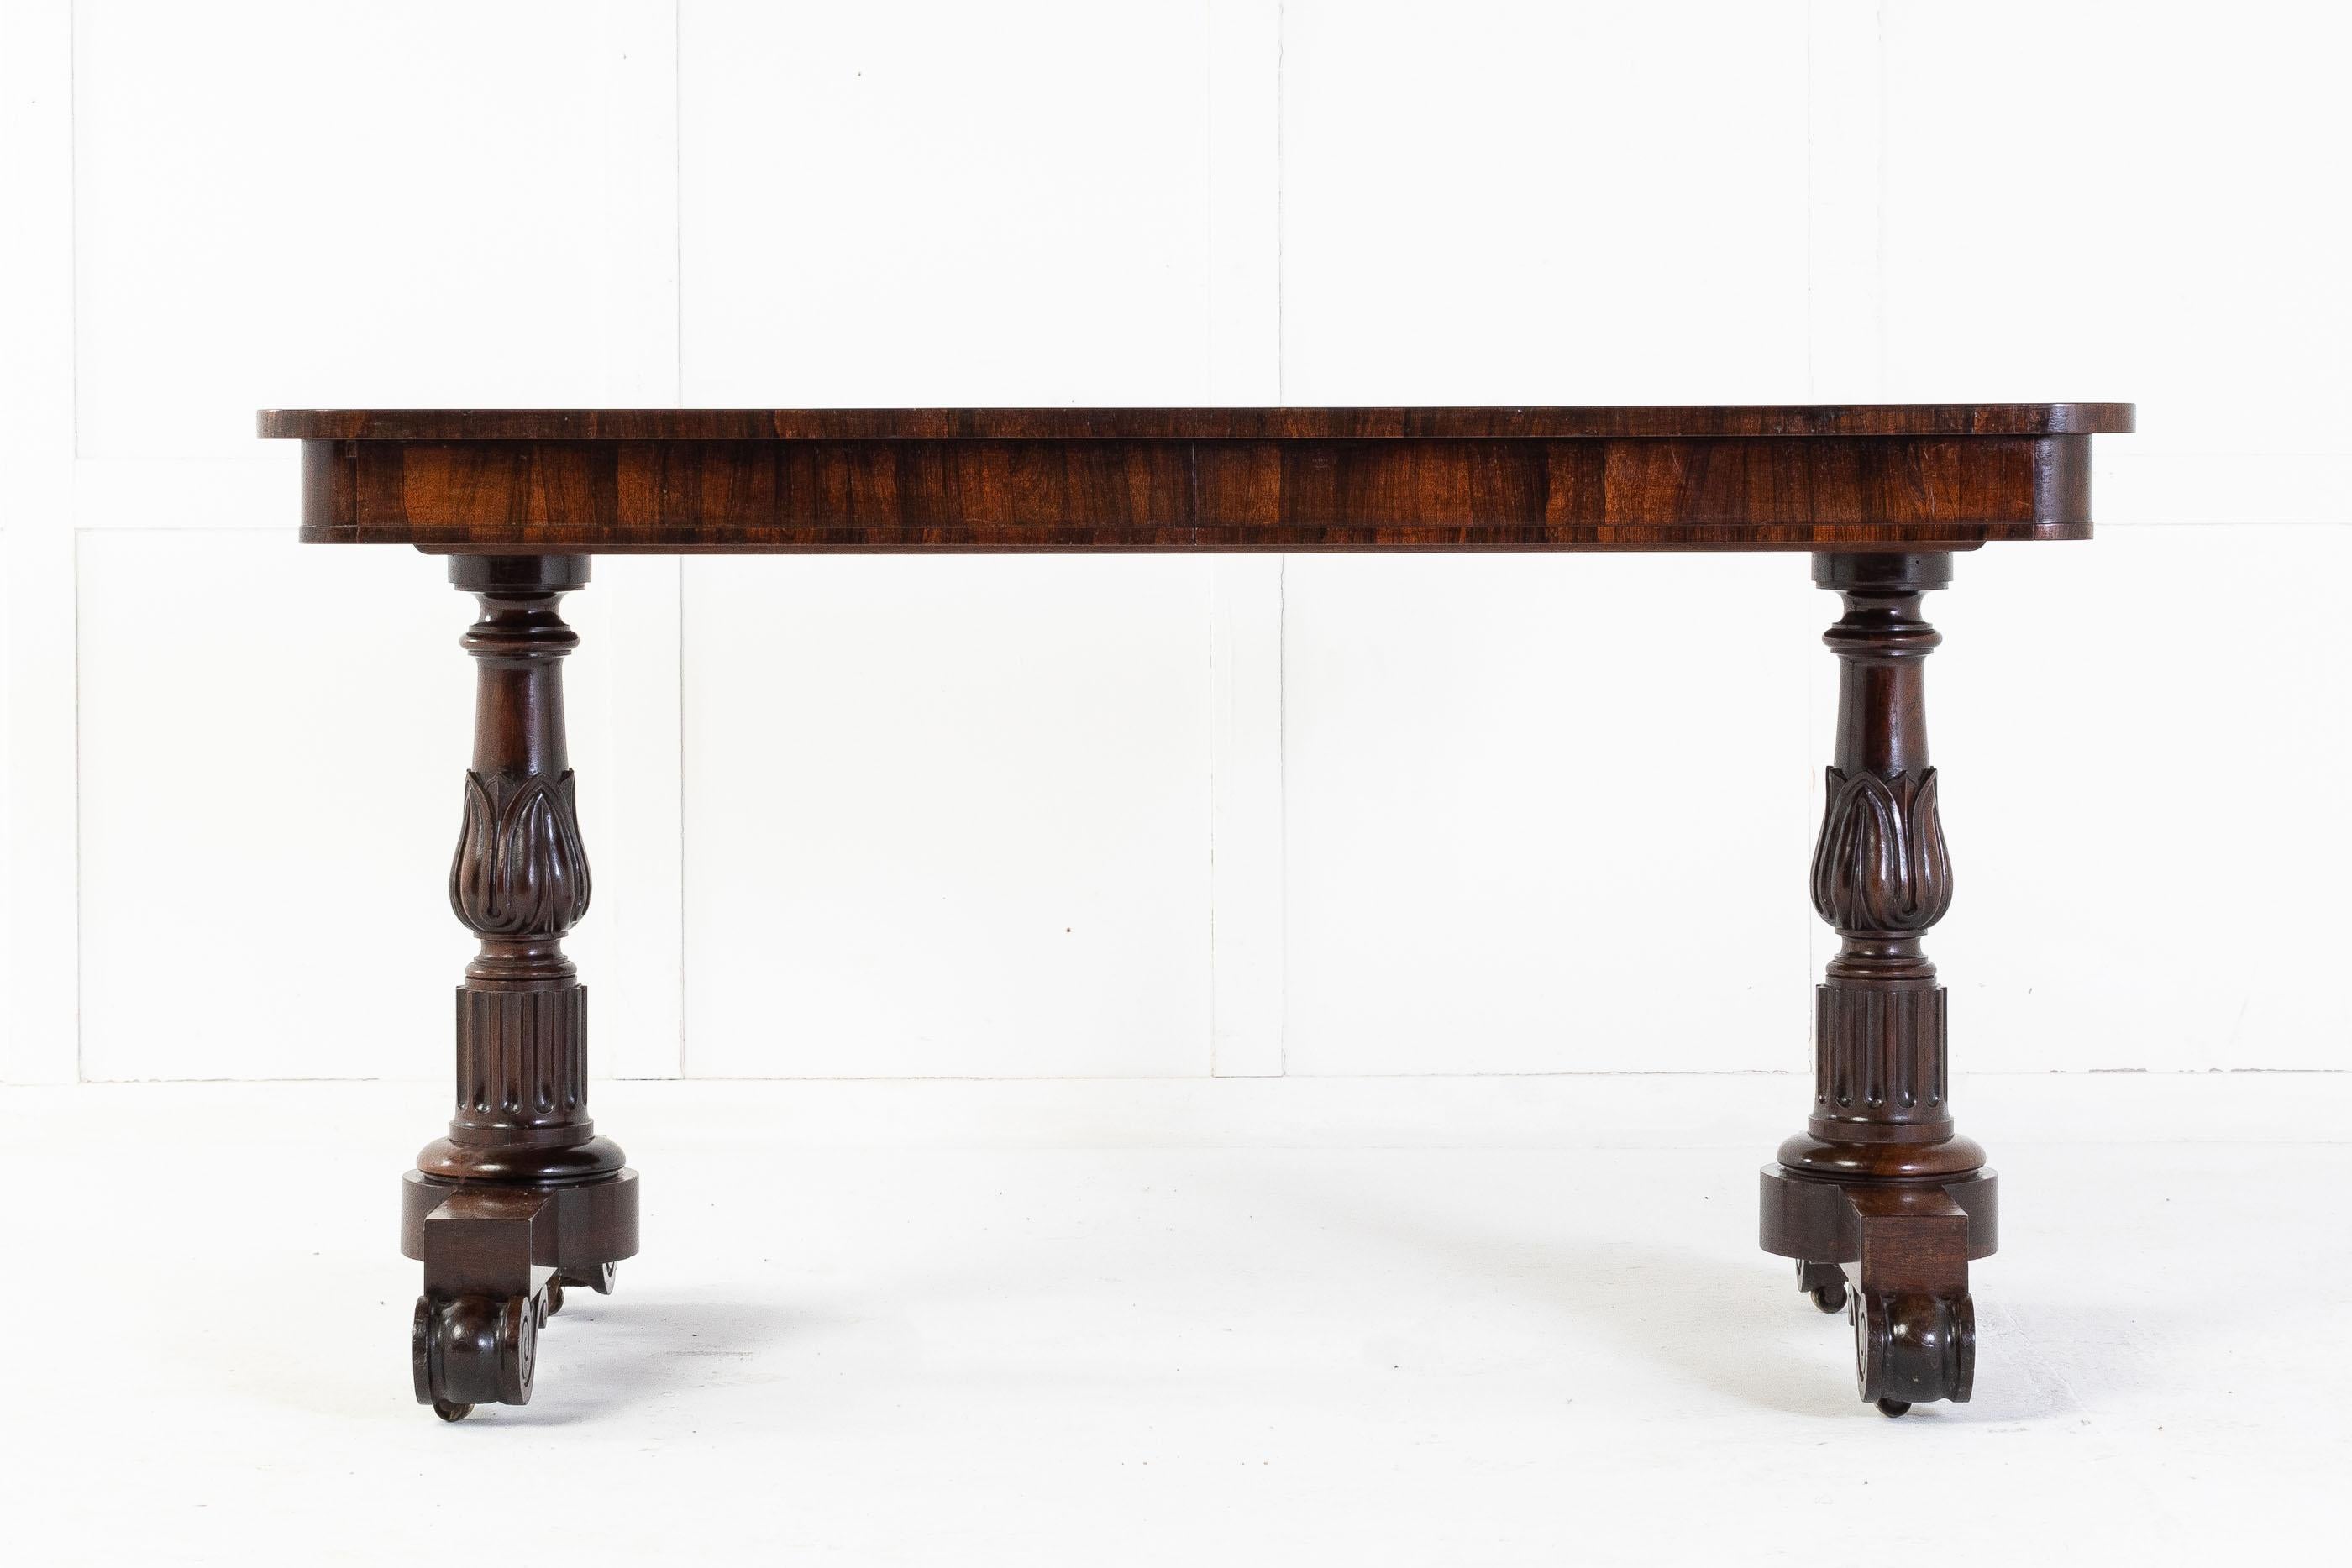 Early 19th century regency rosewood writing table attributed to Gillows.

A substantial quality rosewood desk with a top of choice veneer and two disguised draws. The top is supported by two, quality carved, end supports with deep fluting below